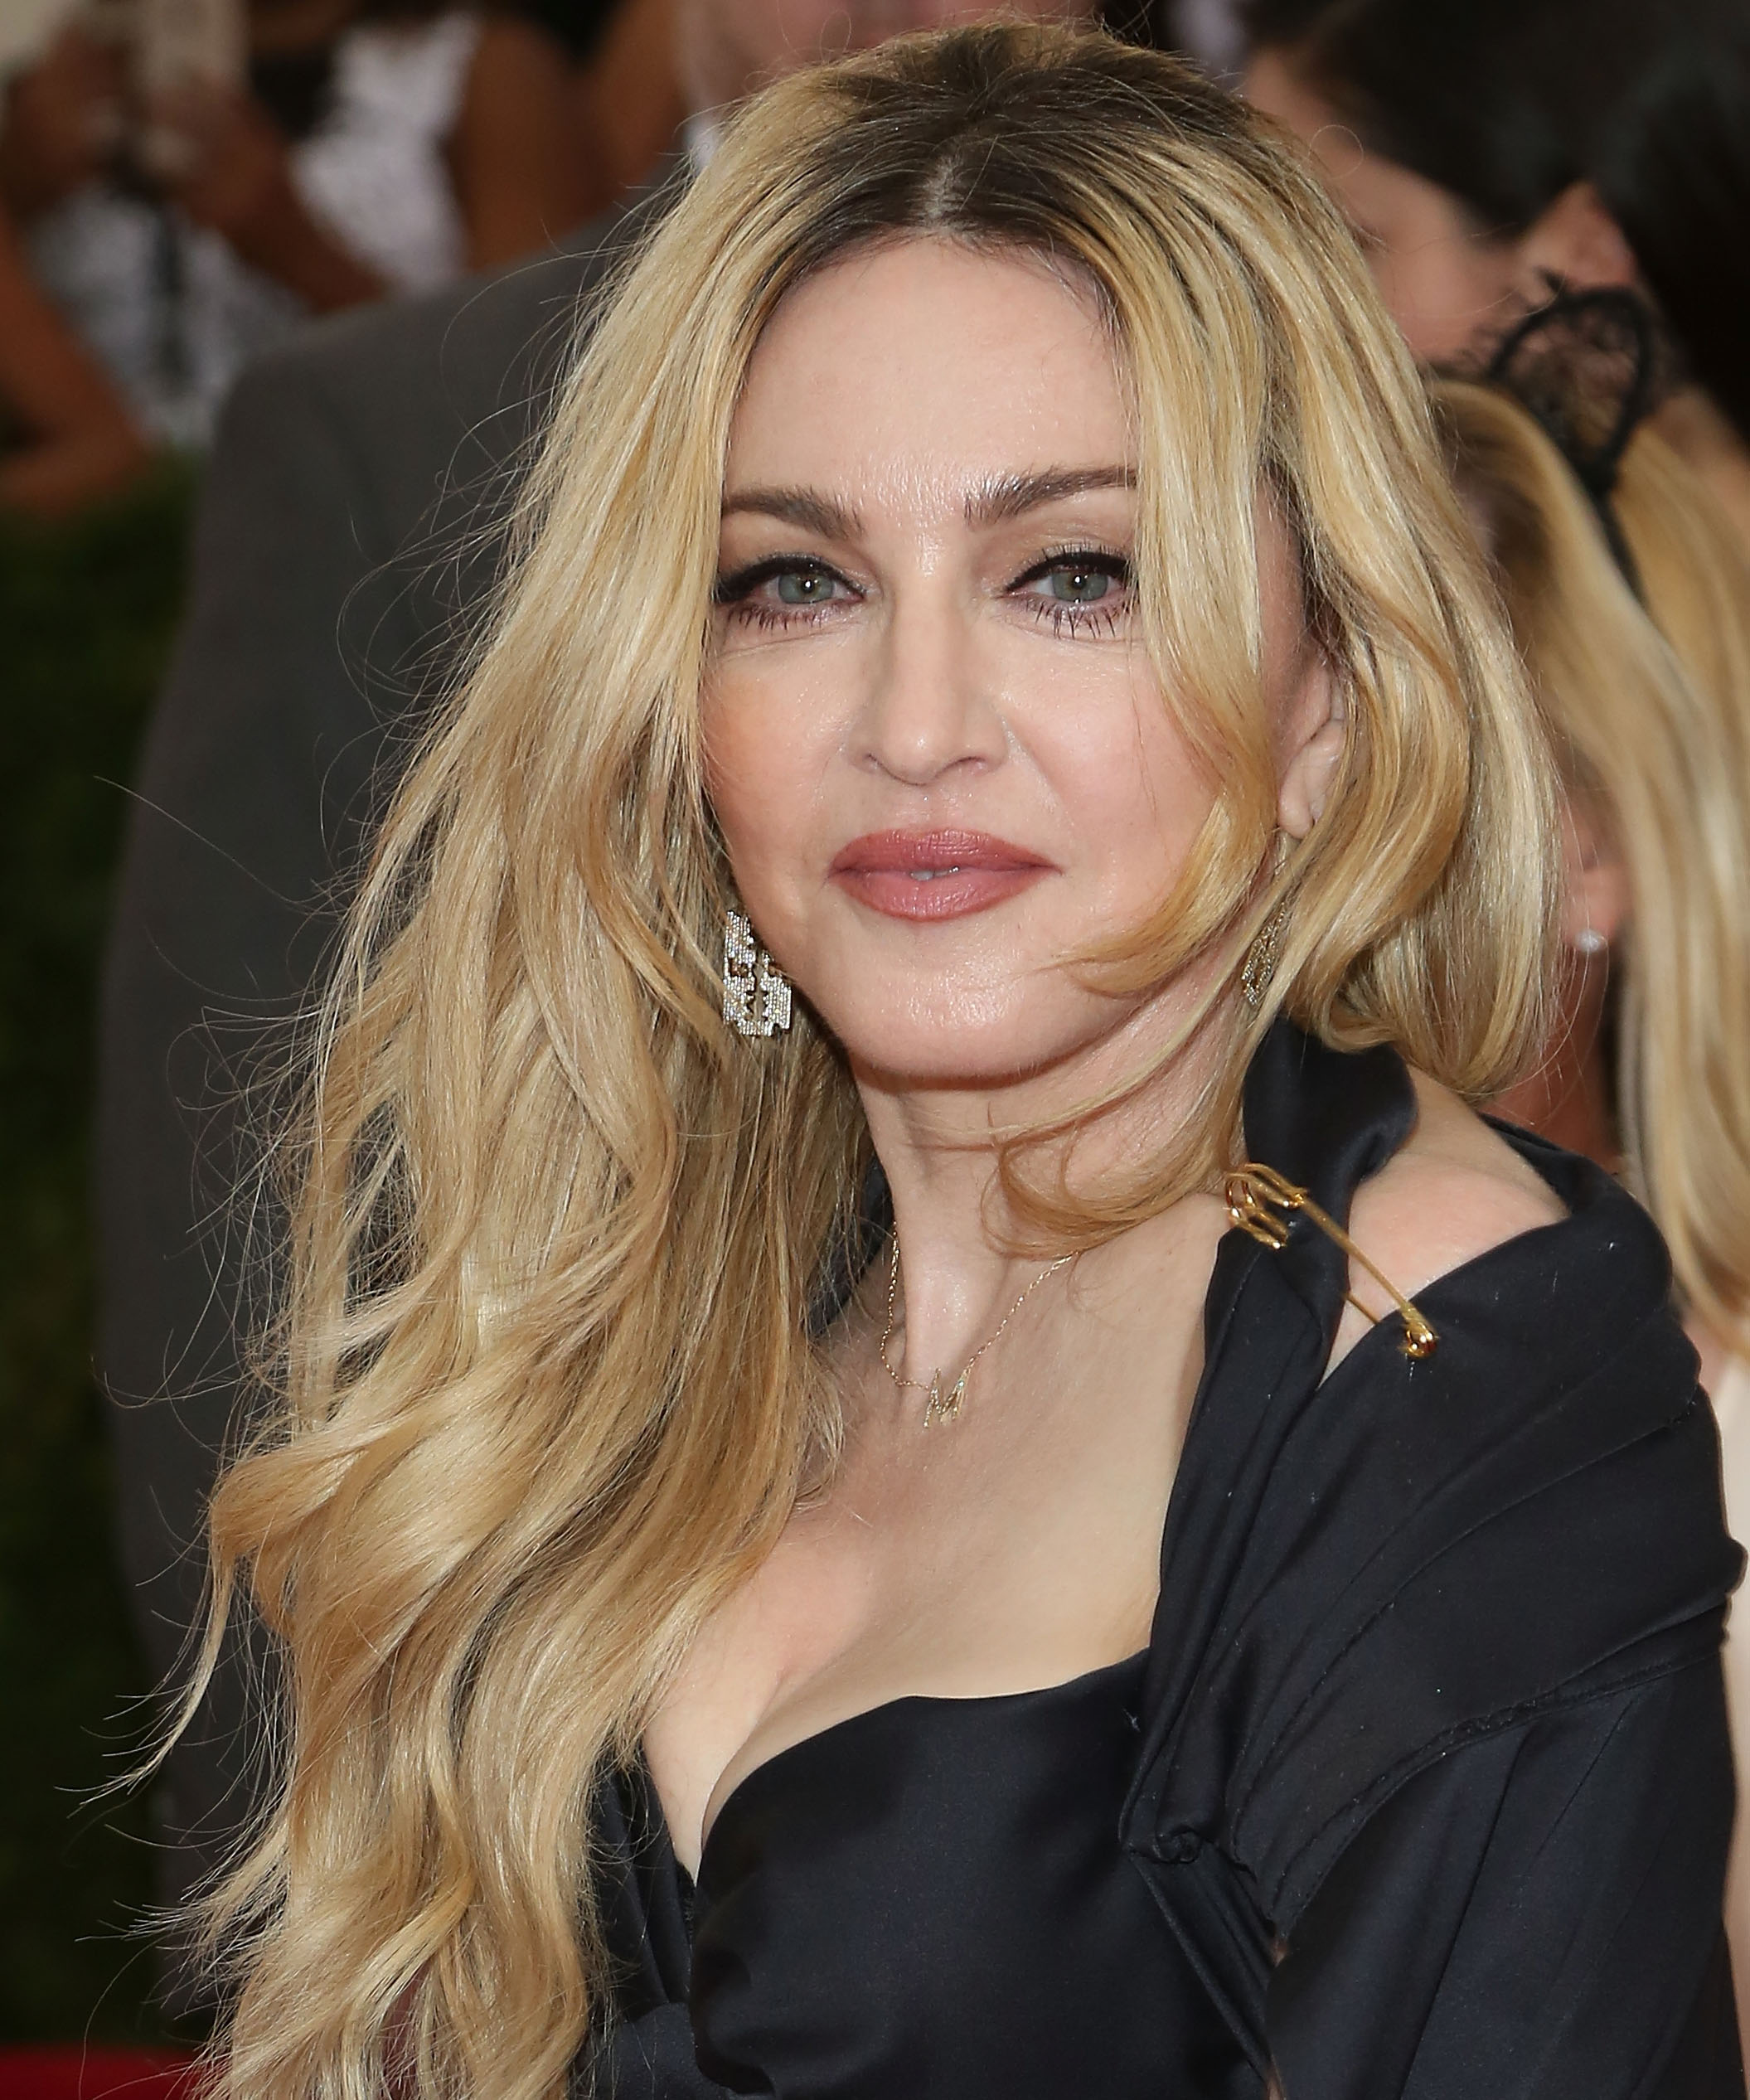 Madonna lashes out at fans after they boo her for being late